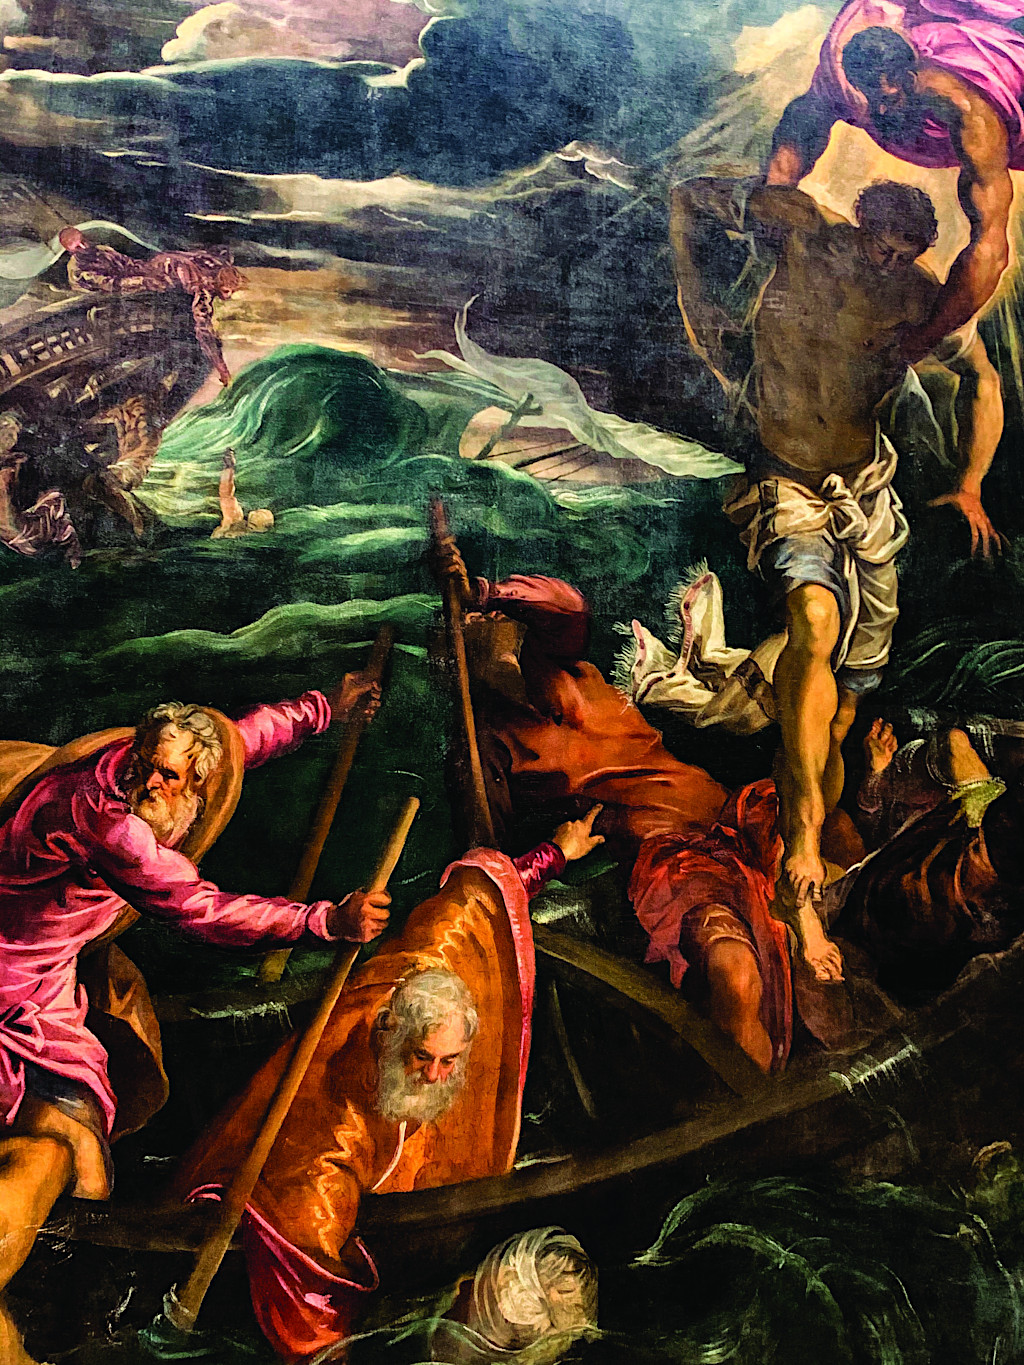 St Mark Saving a Saracen from Ship Wreck by Tintoretto (Accademia) - Art in Venice